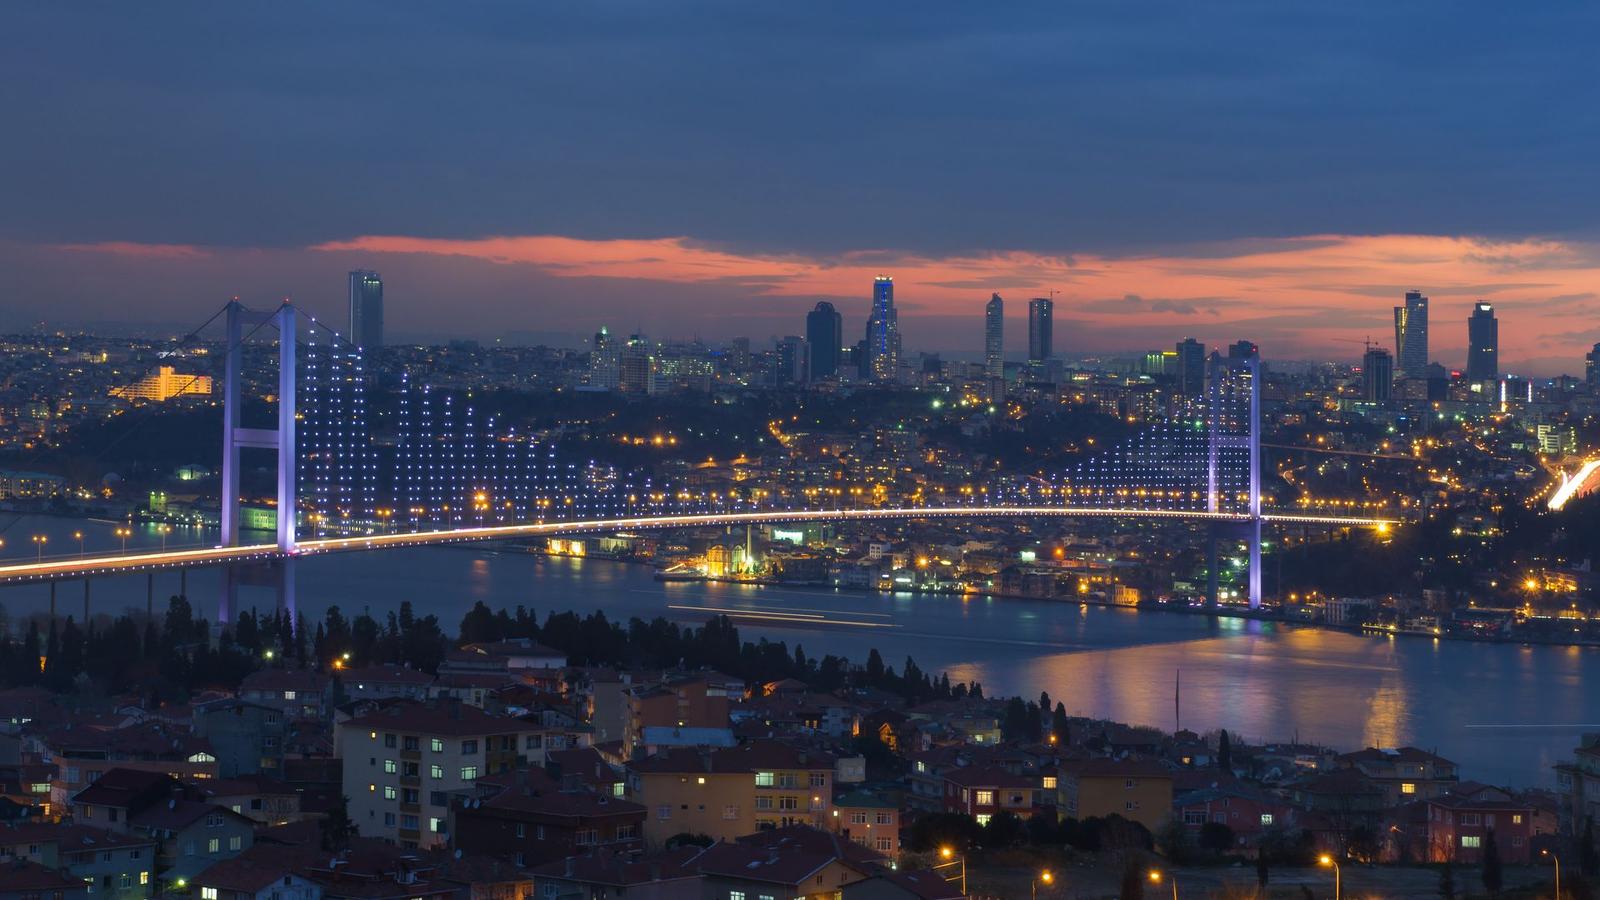 It's Obvious What Your Favorite Cuisine Is from Cities … Quiz Istanbul, Turkey